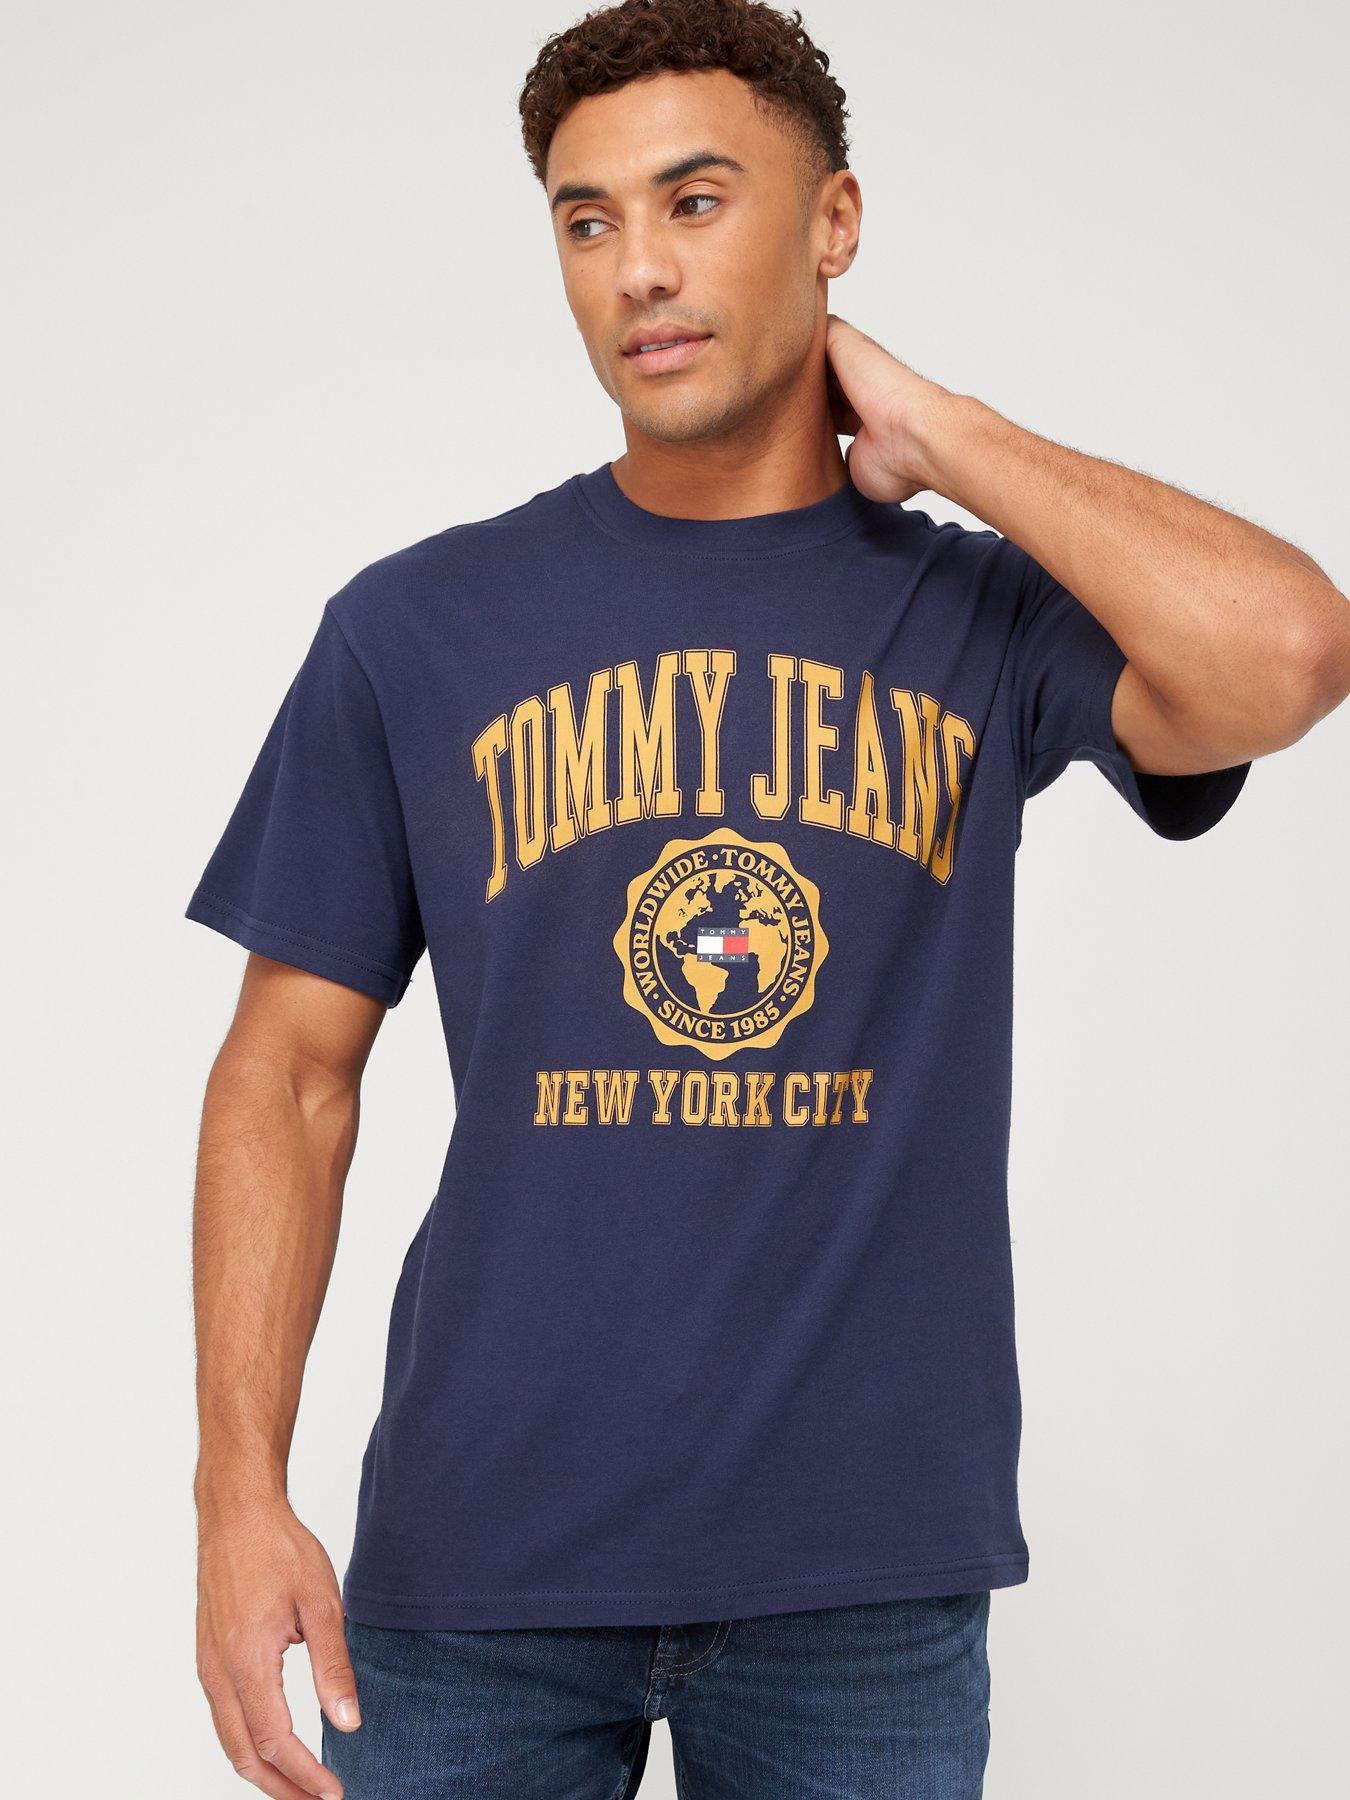 Jeans College Navy Sale Tommy at Huge New on | Threads Logo T-Shirt - Savings Twilight